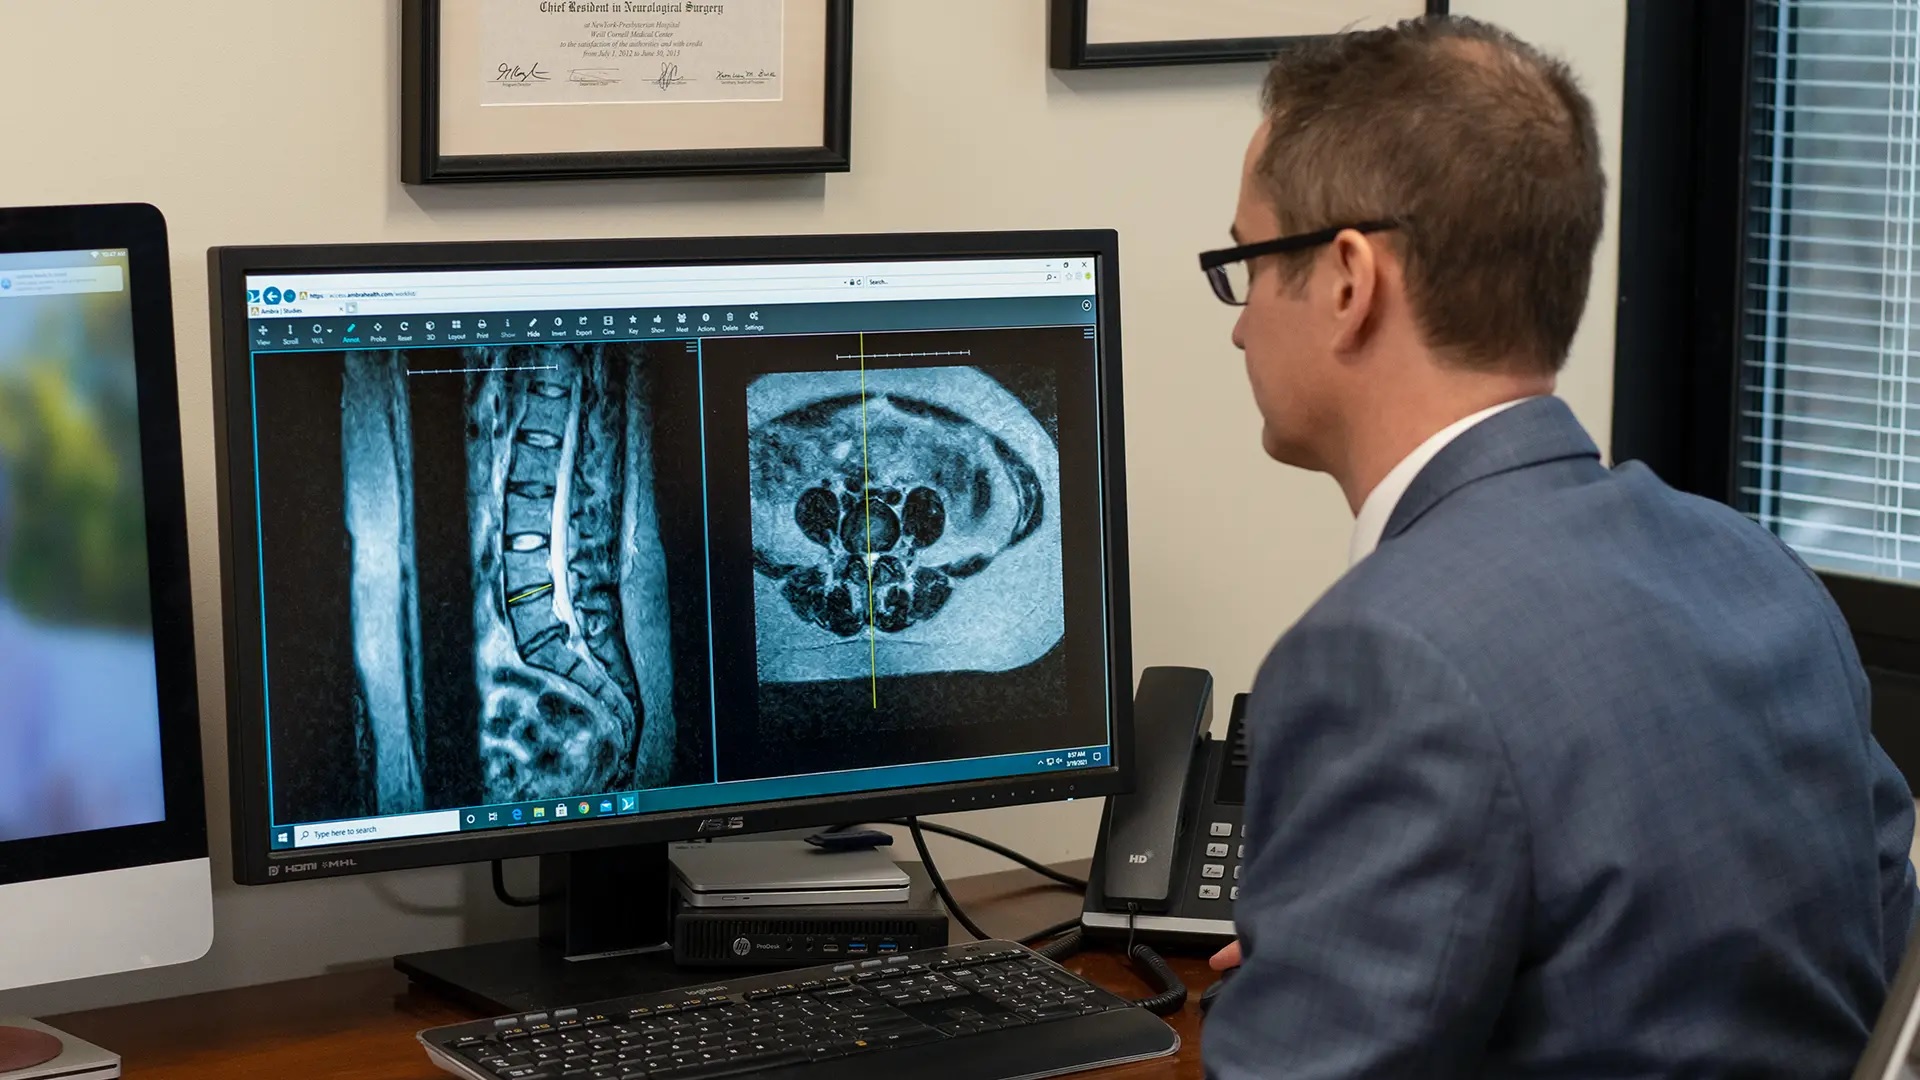 Herniated Disc Treatment Options Explained